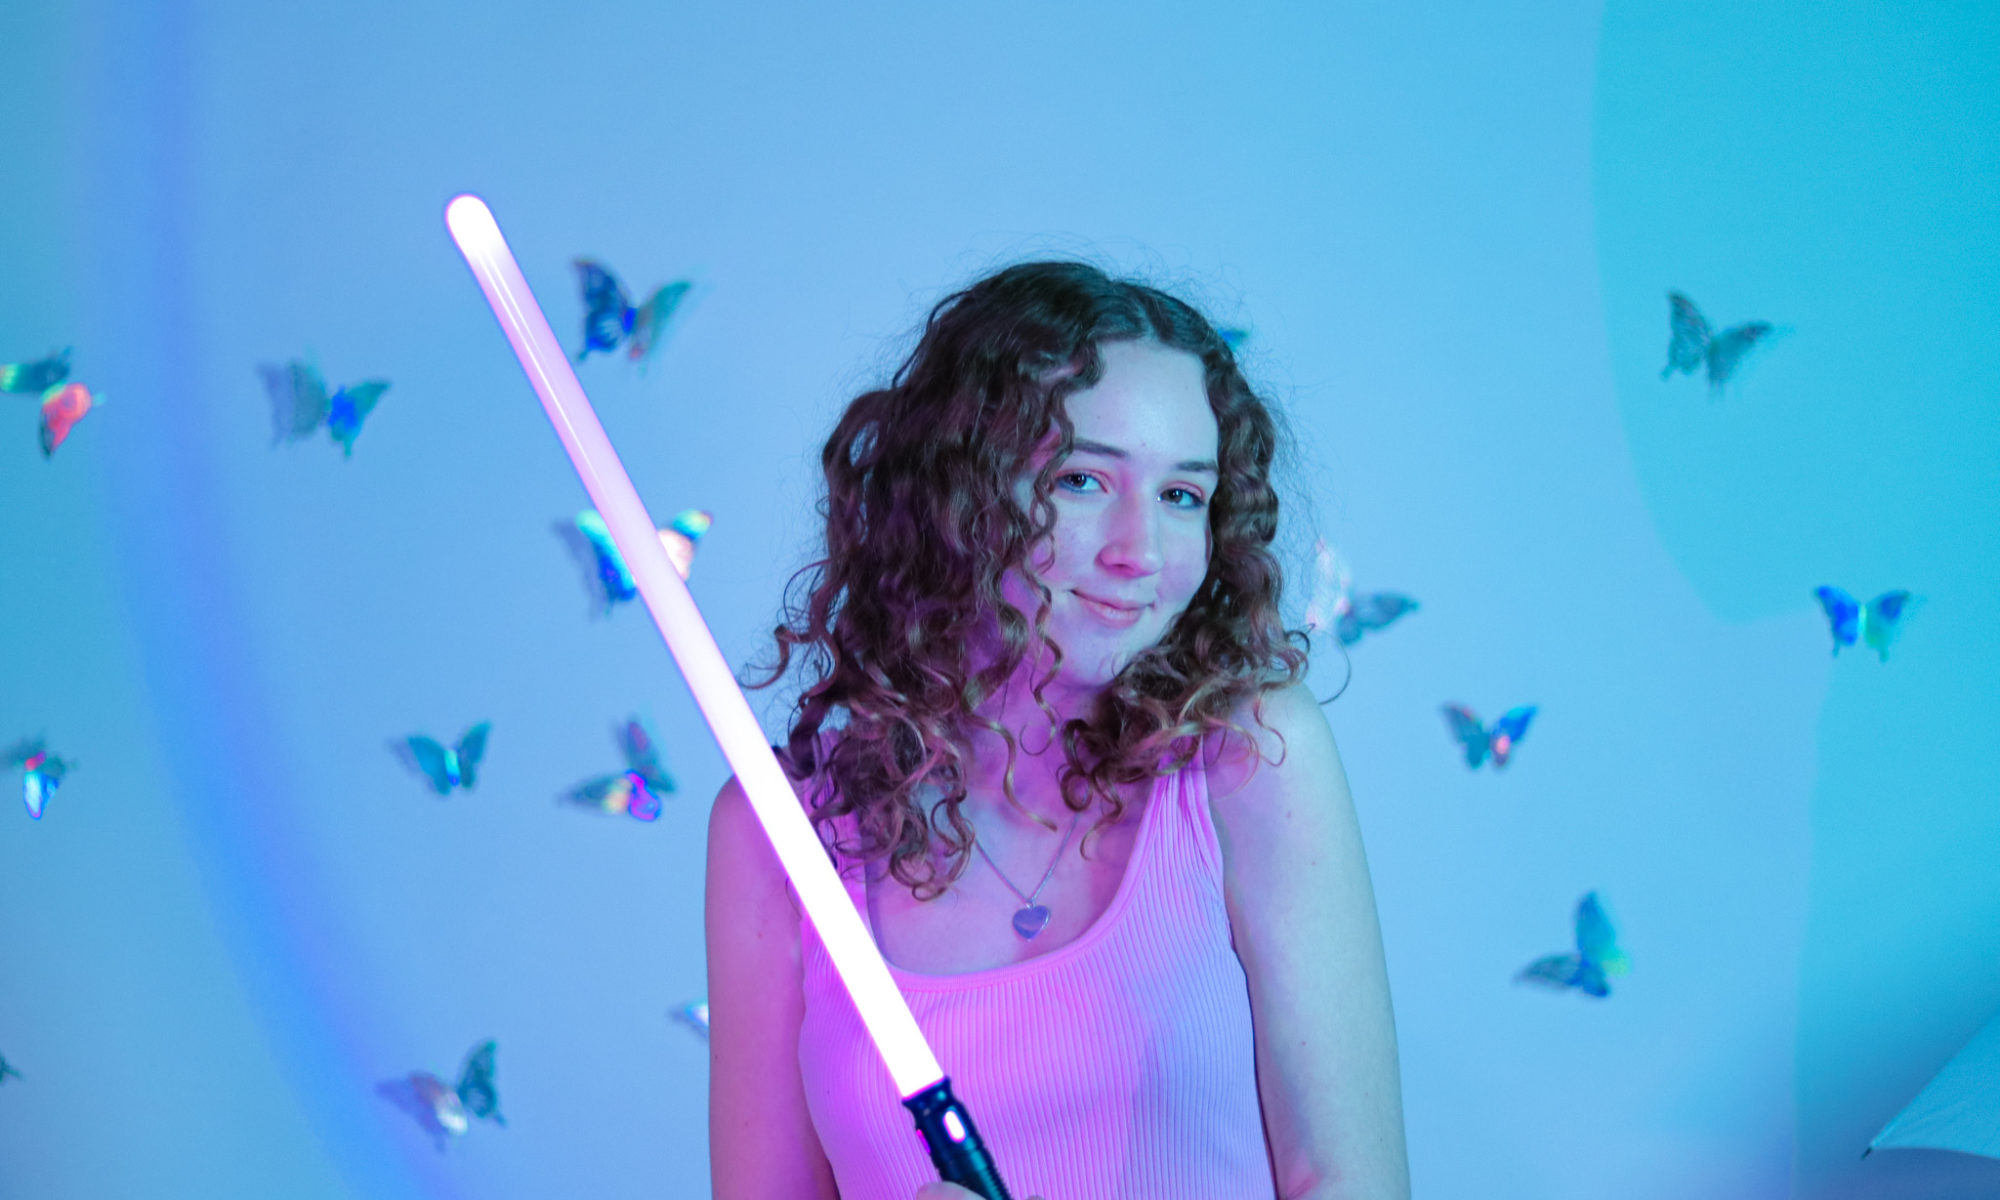 Libby with light up saber